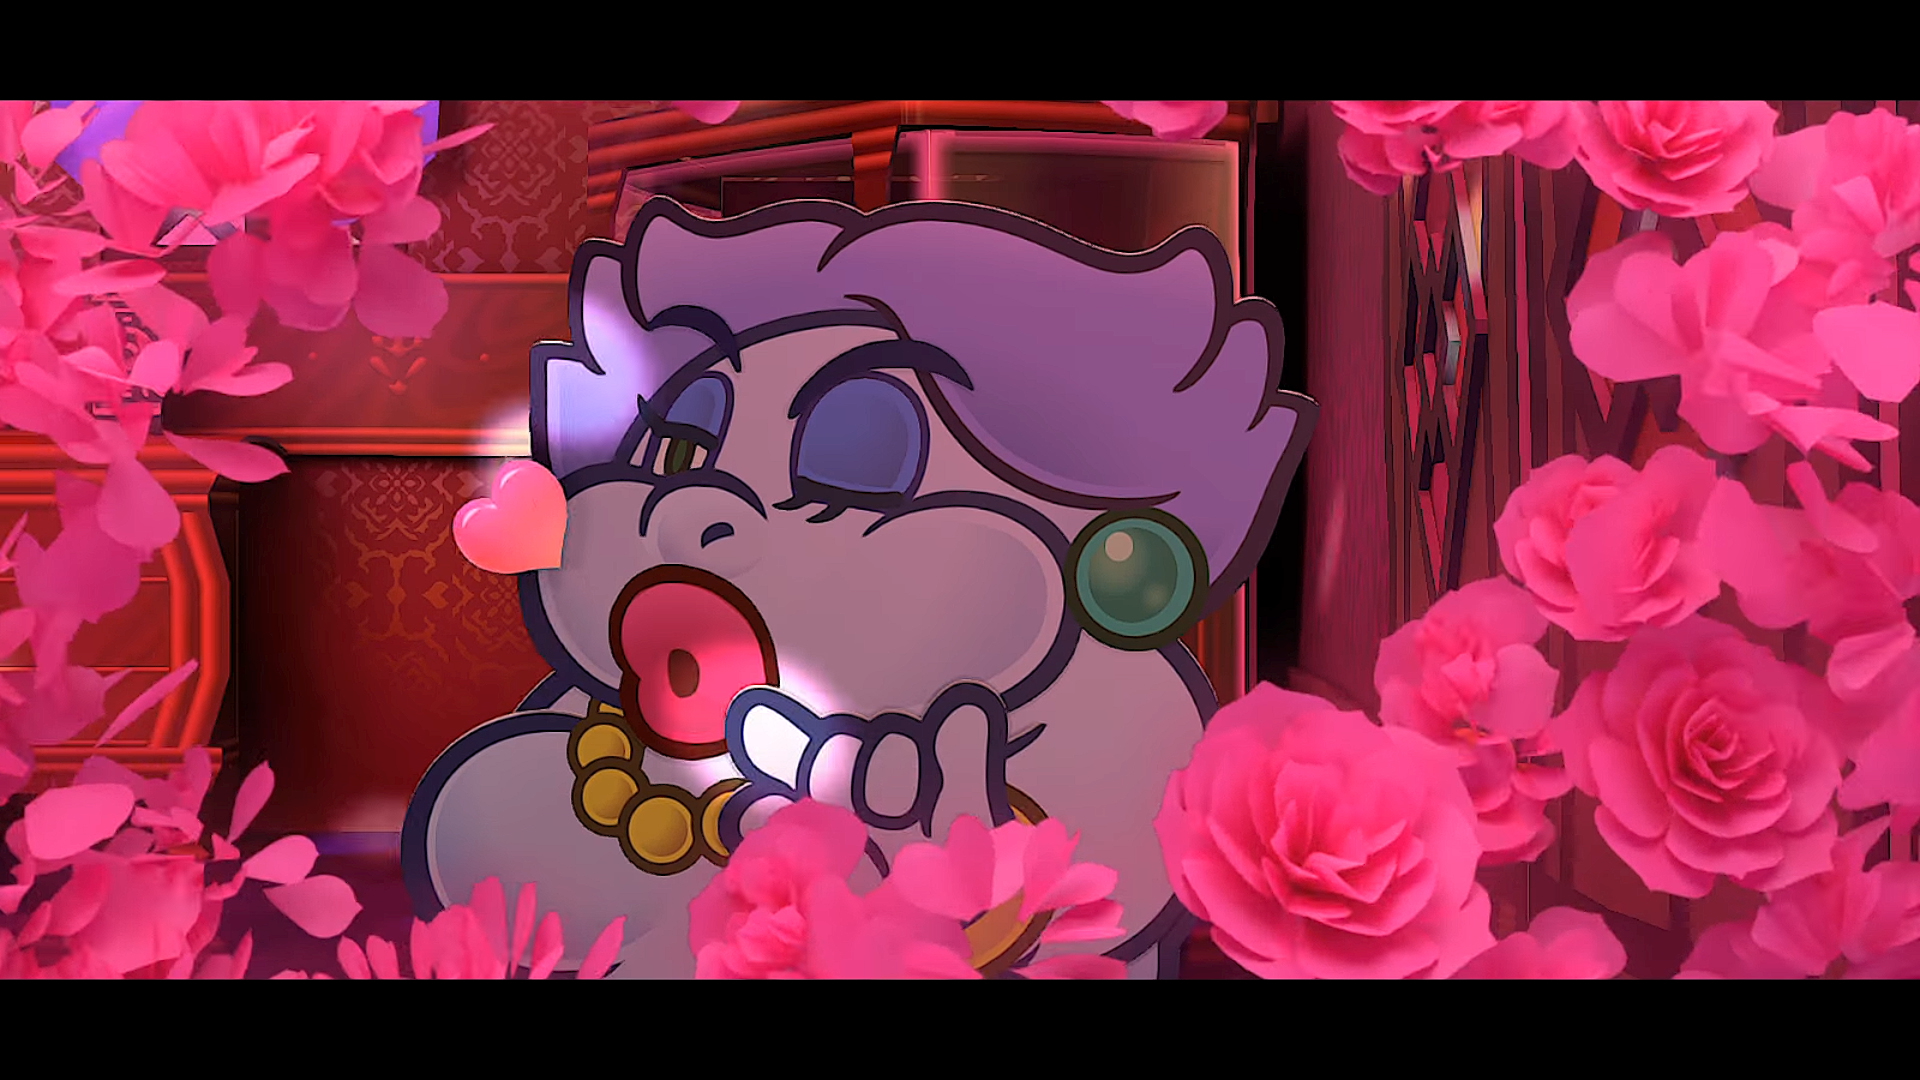 Madame Flurrie, a purple ghost-like lady with a pearl necklace, pink lips and a sorta cobalt-blue eye shadow, blows a kids wreathed in roses in Paper Mario: The Thousand-Year Door